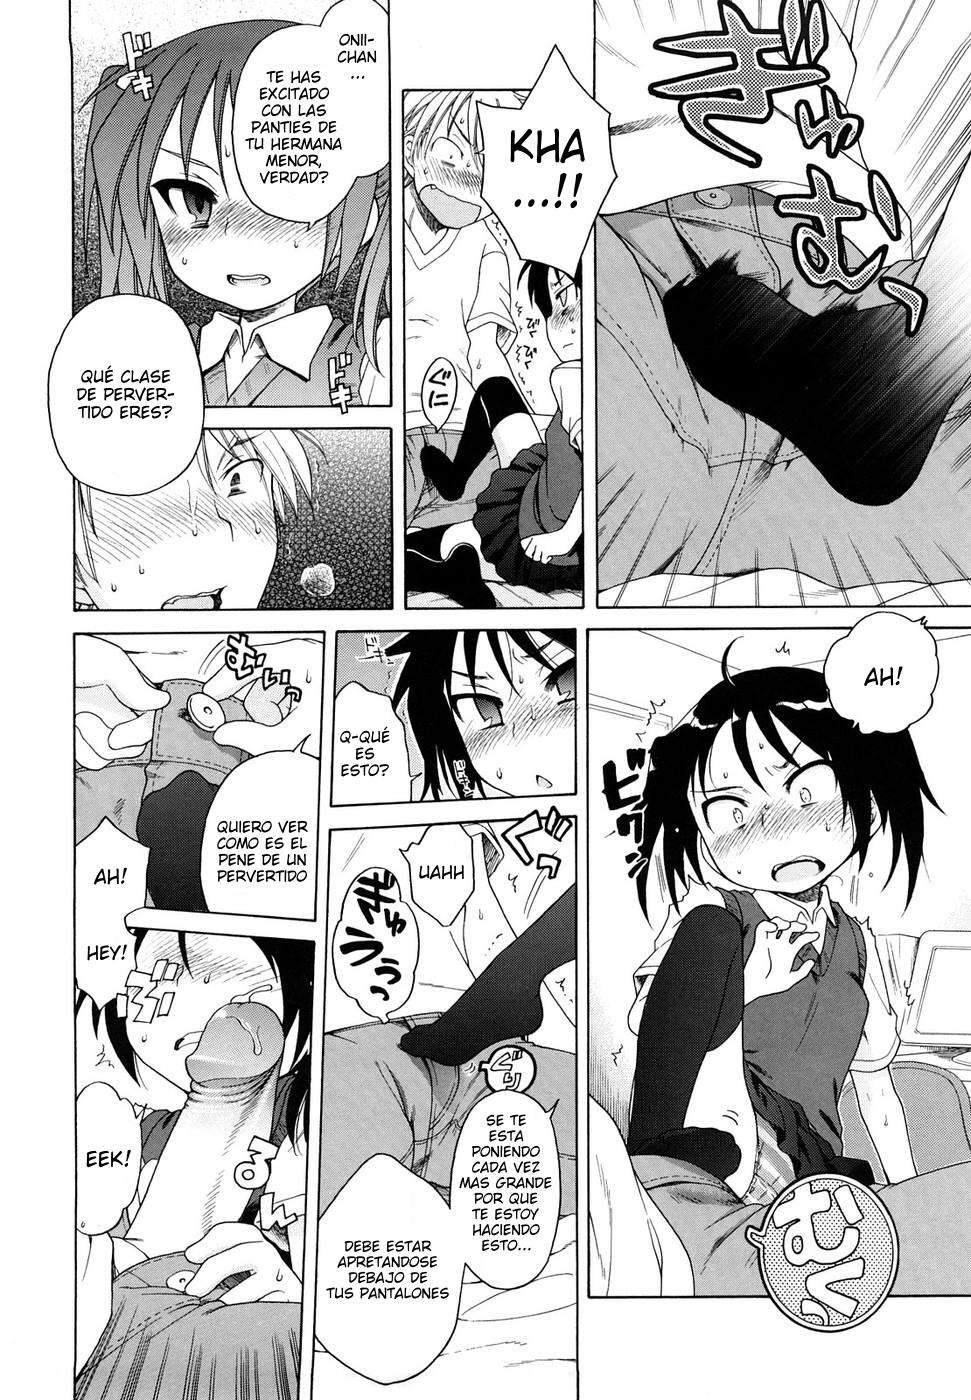 Me gustas Onii-chan! Chapter-4 - 9